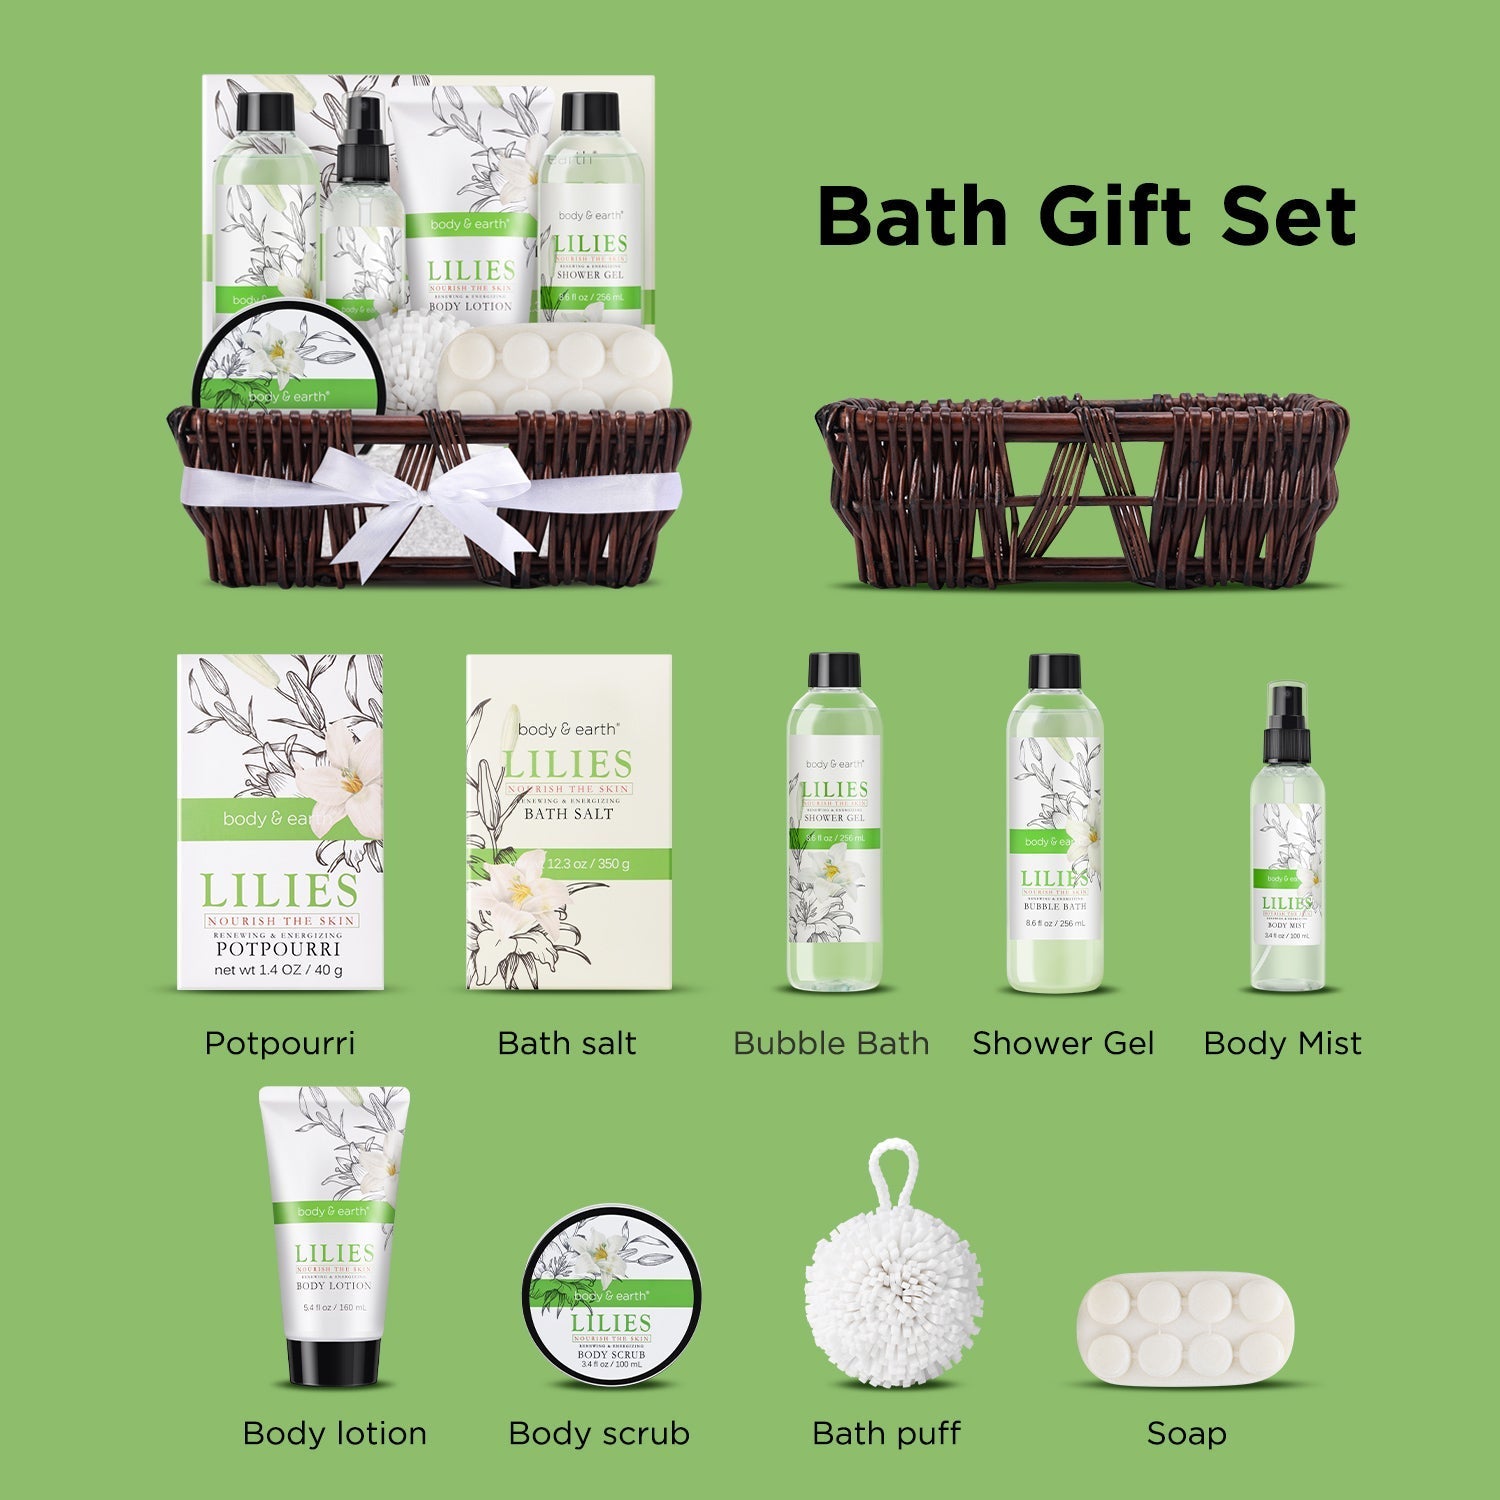 Body &amp; Earth Gift Sets Lily Gift Baskets